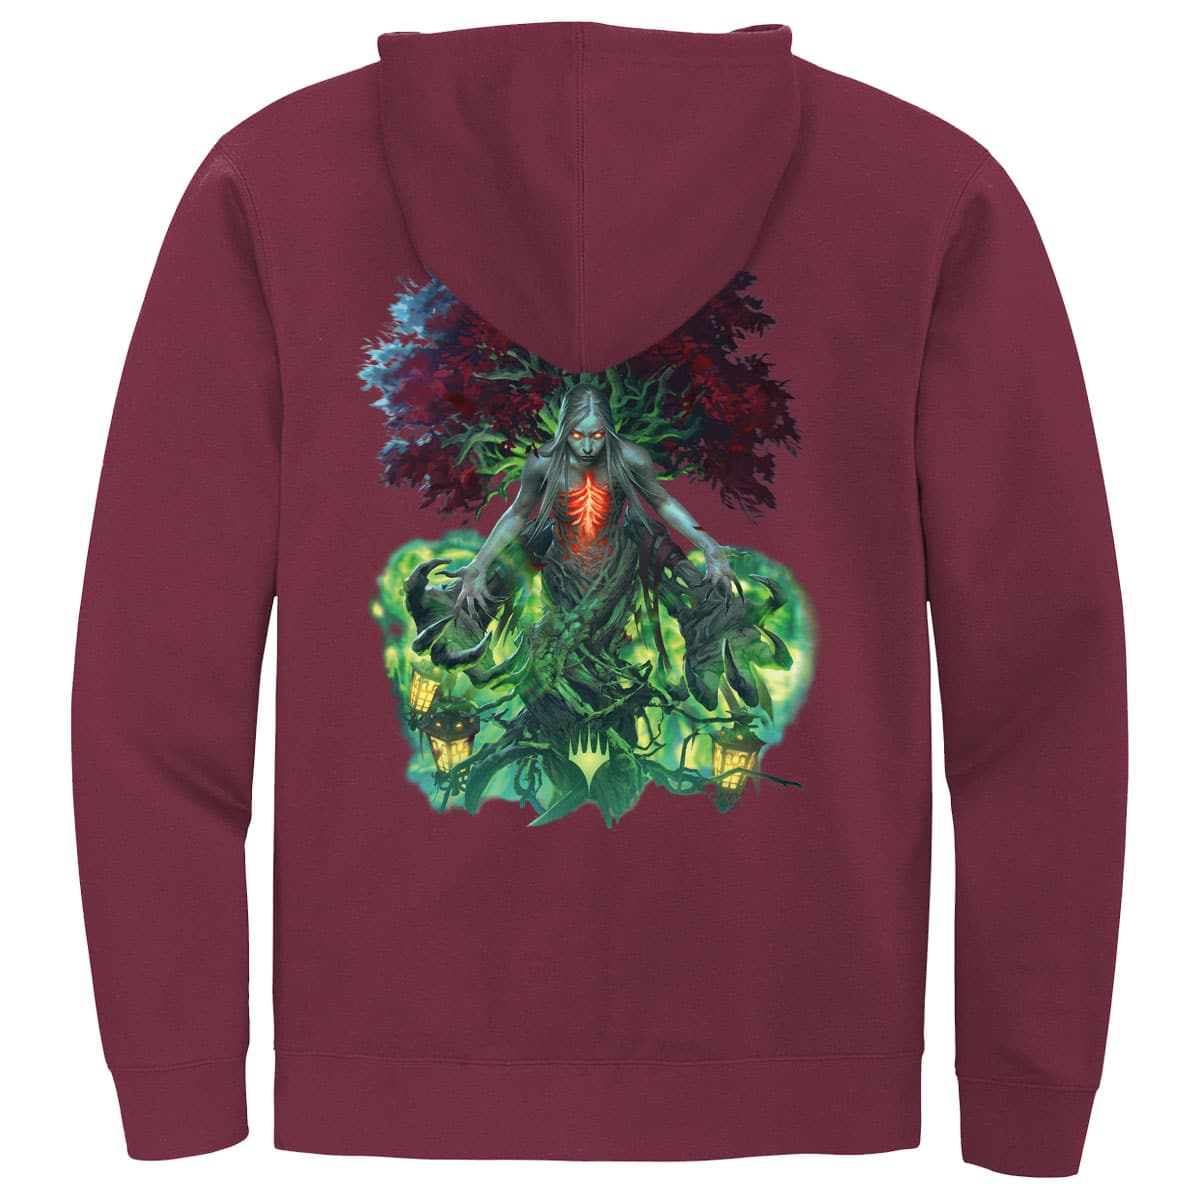 Innistrad: Midnight Hunt Wrenn and Seven Hoodie for Magic: The Gathering